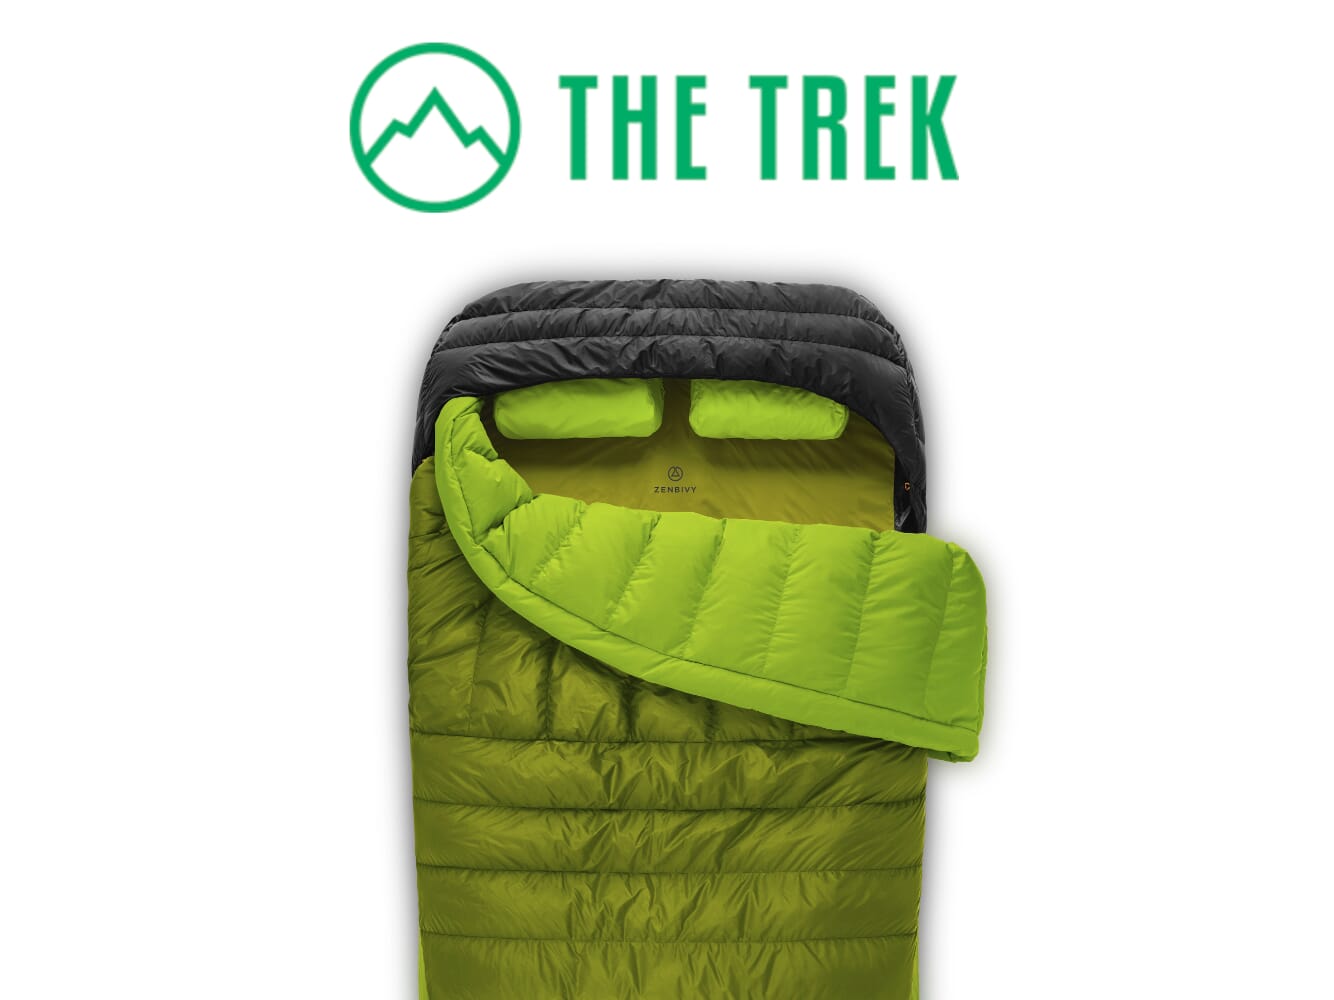 PRESS: The Trek reviews the Light Bed Double 25°